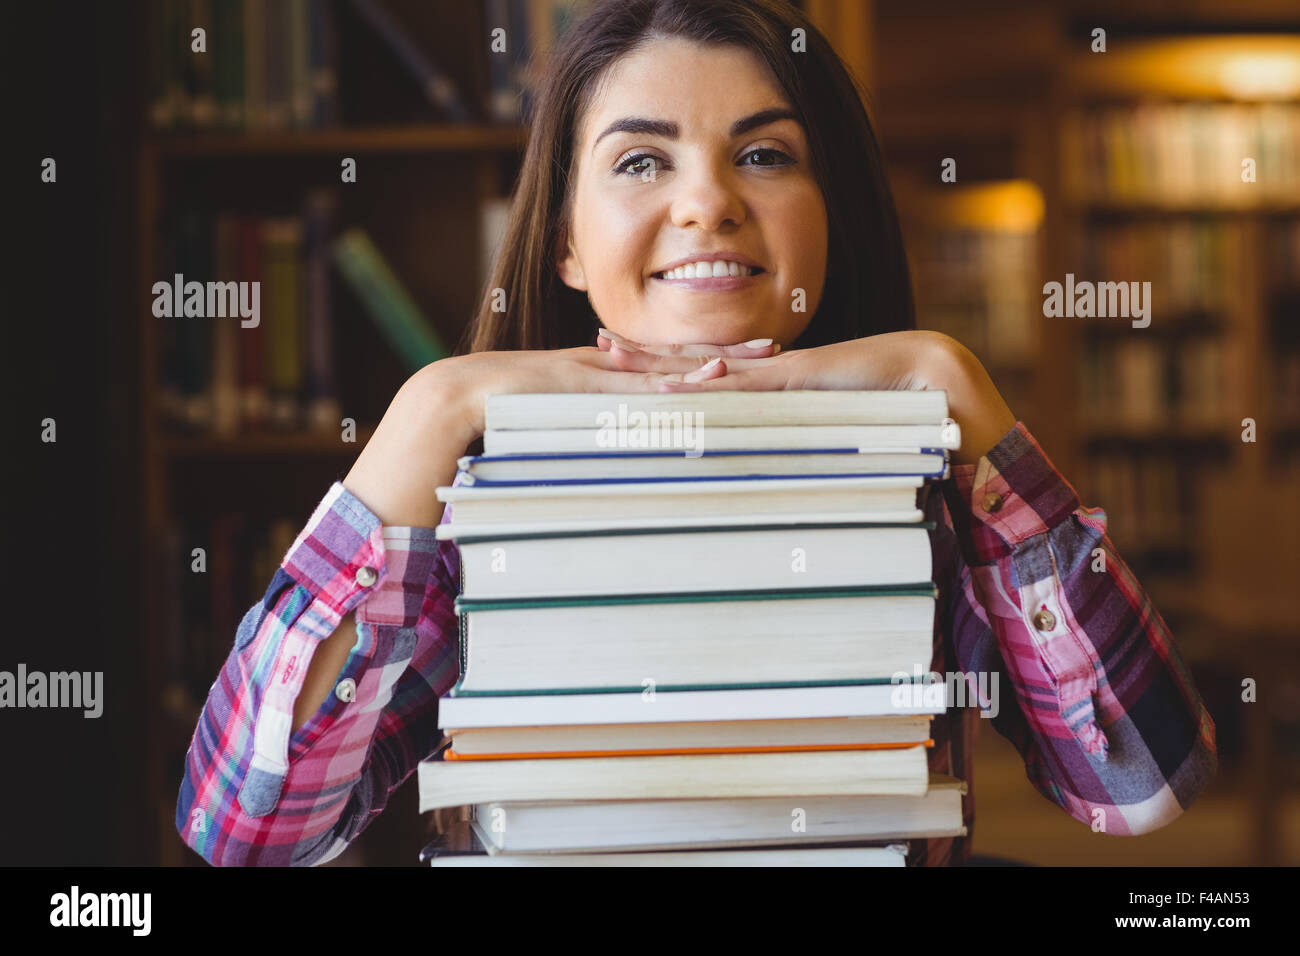 Female student leaning on book stack Stock Photo